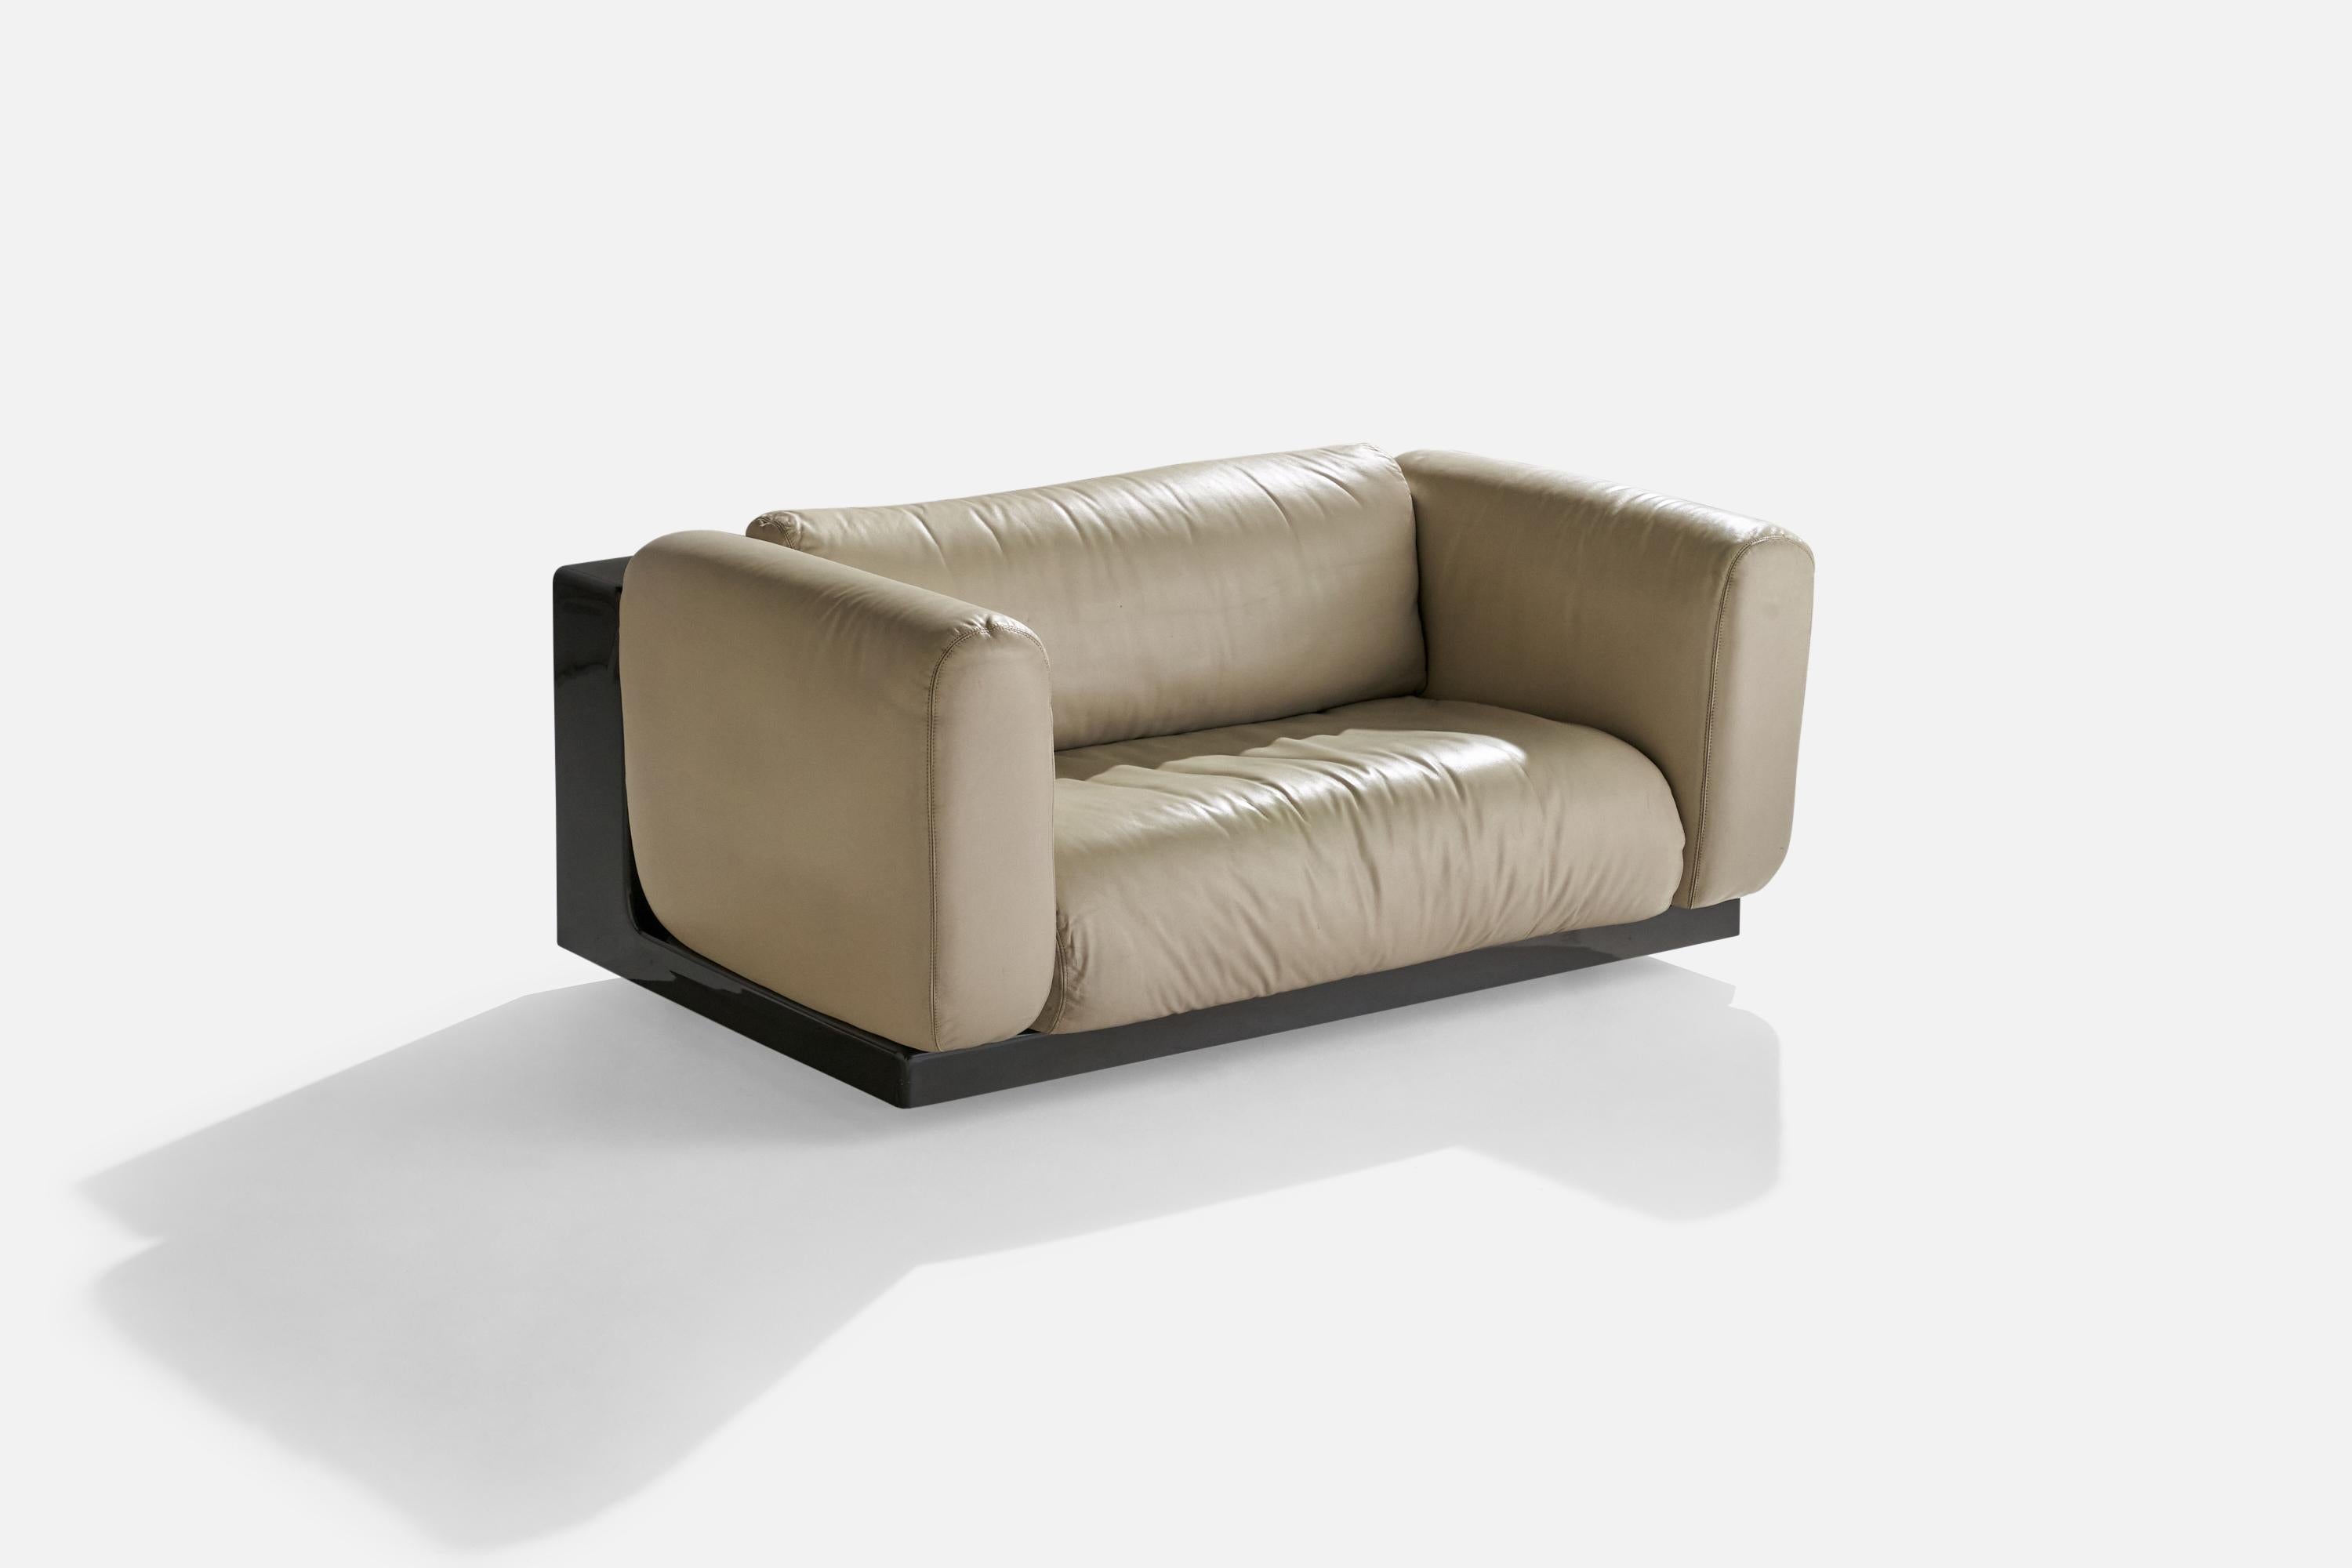 A two-seater black ABS plastic and white / light grey leather sofa, designed by Cini Boeri, and produced by Gavina, Knoll, 1970s.

seat height 14”.